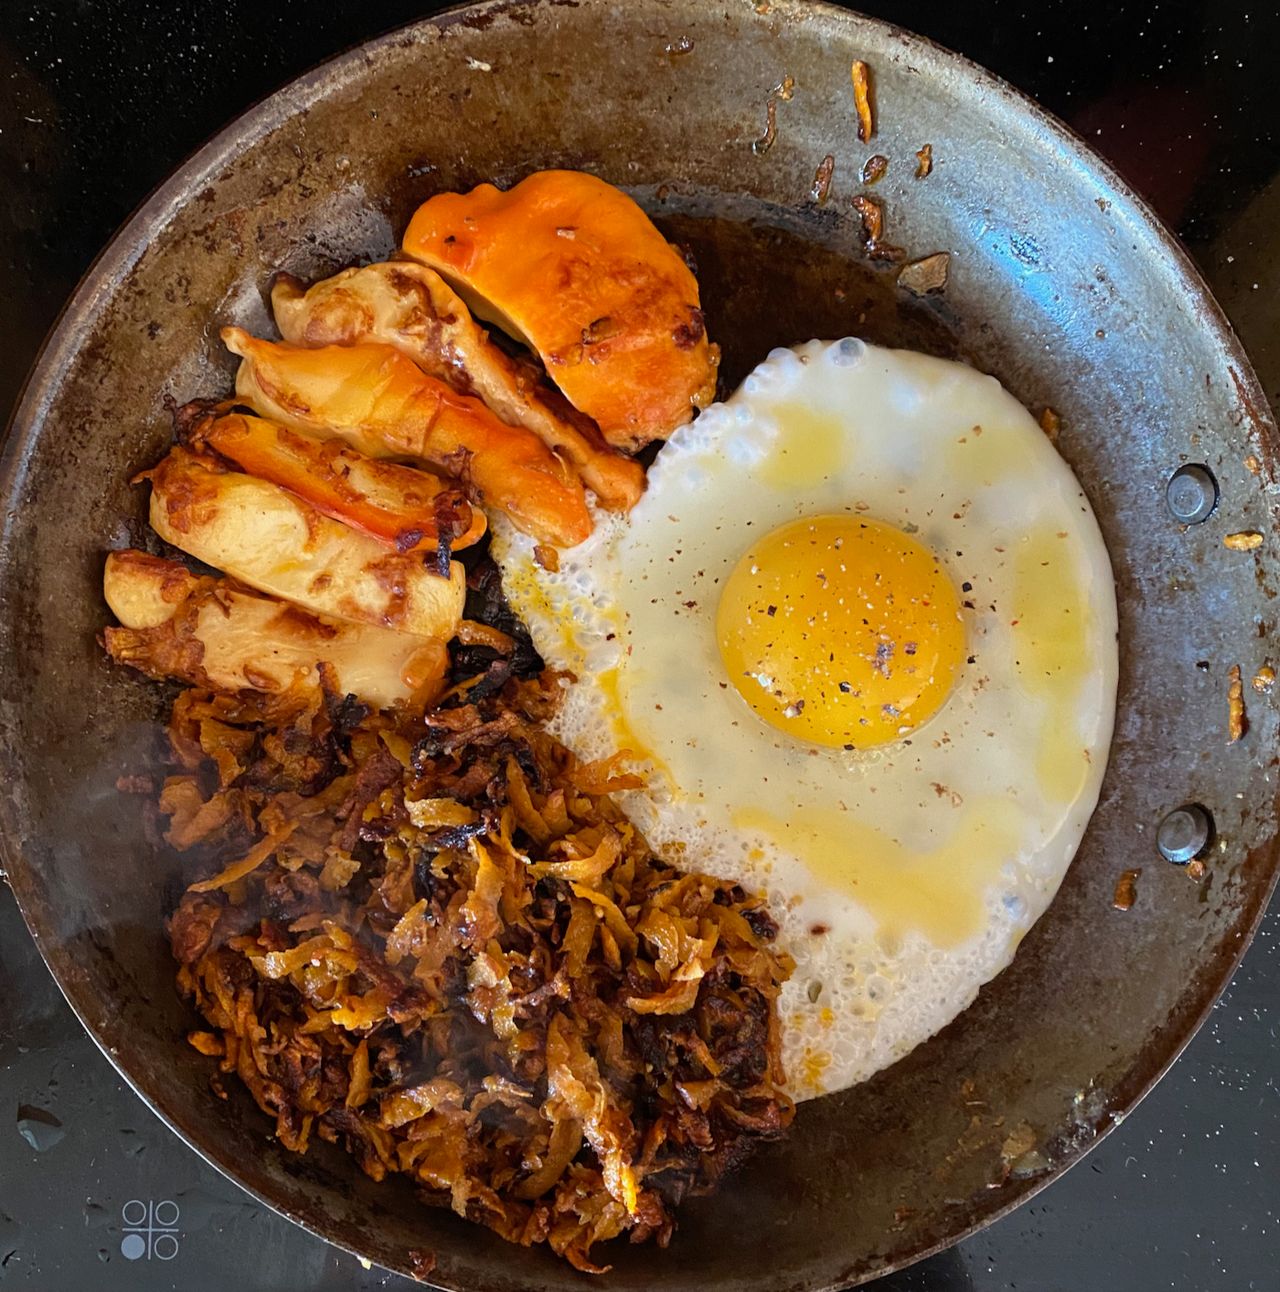 A top-down photo of a skillet on a stove, with a sunny-side up egg, strips of orange mushroom being cooked, and some hash browns being fried.